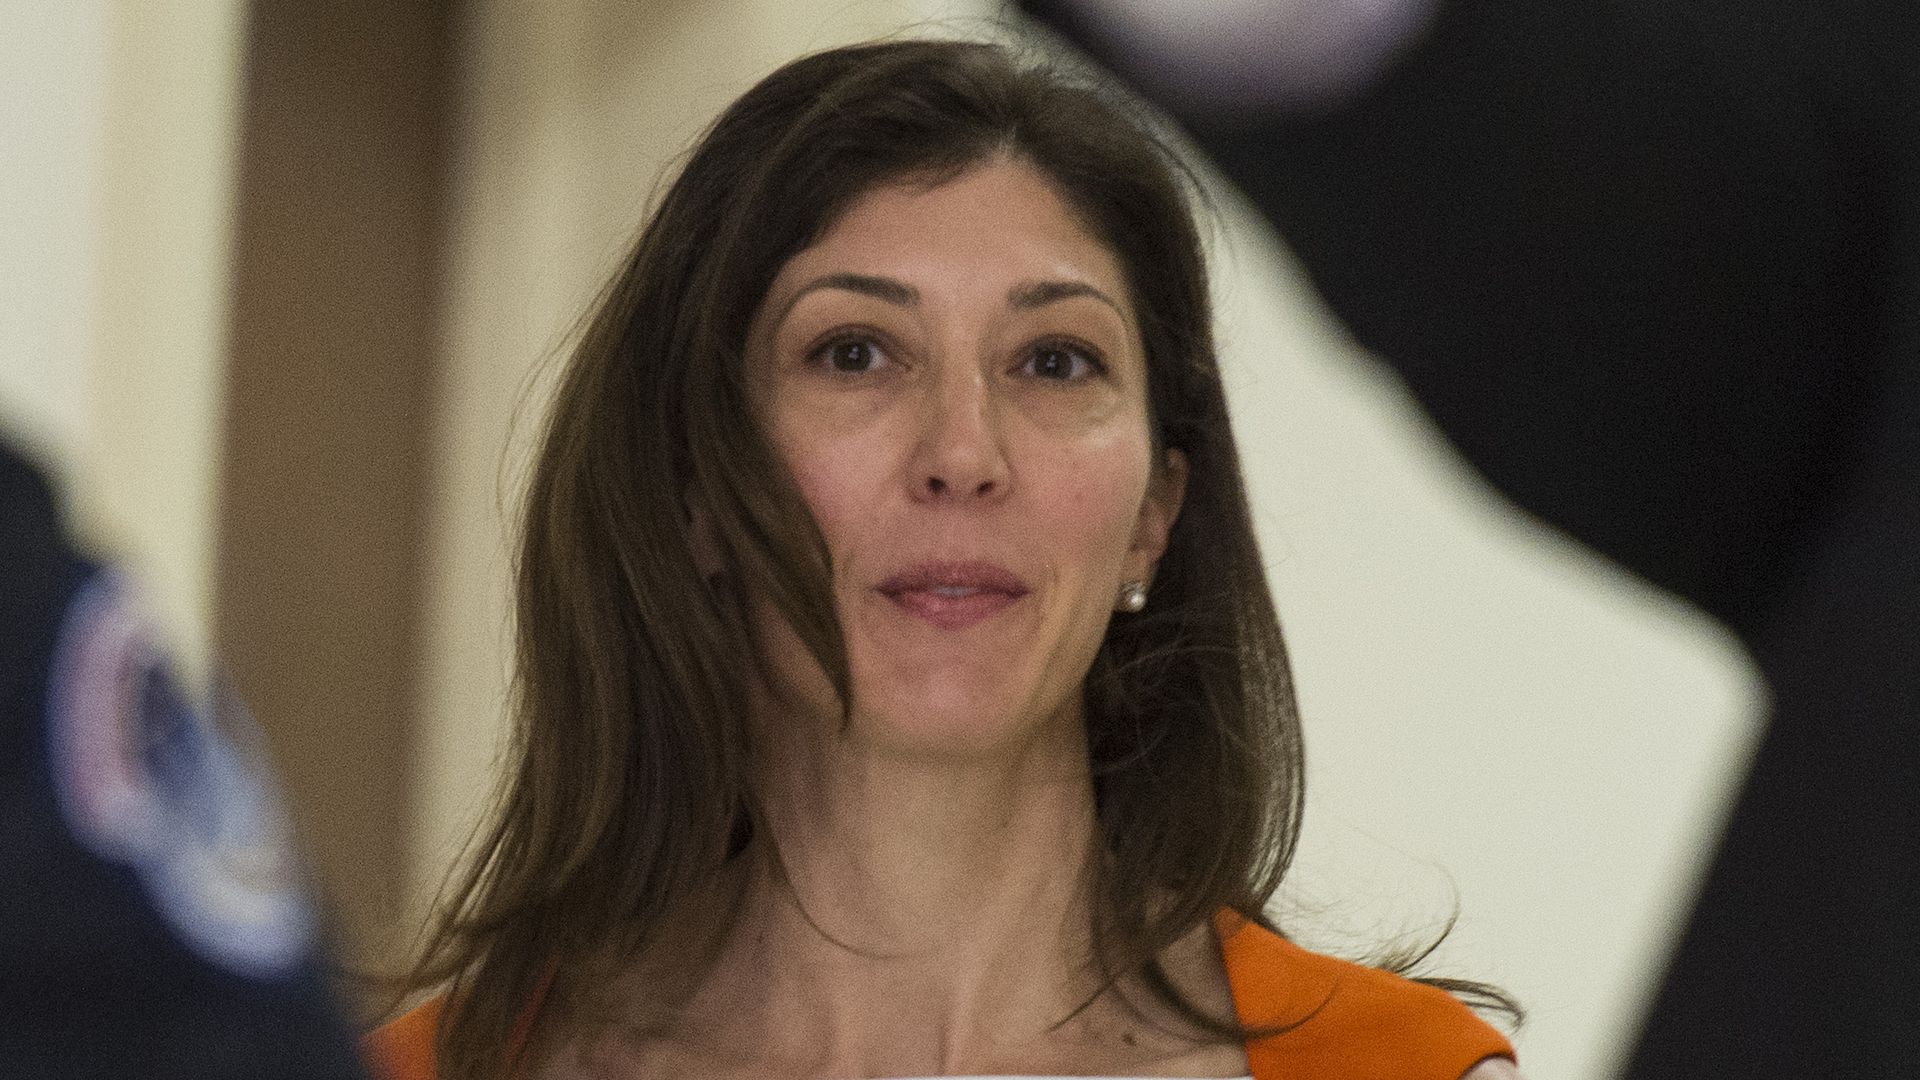 Lisa Page, former legal counsel to former FBI Director Andrew Mc Cabe, arrives on Capitol Hill July 16, 2018 